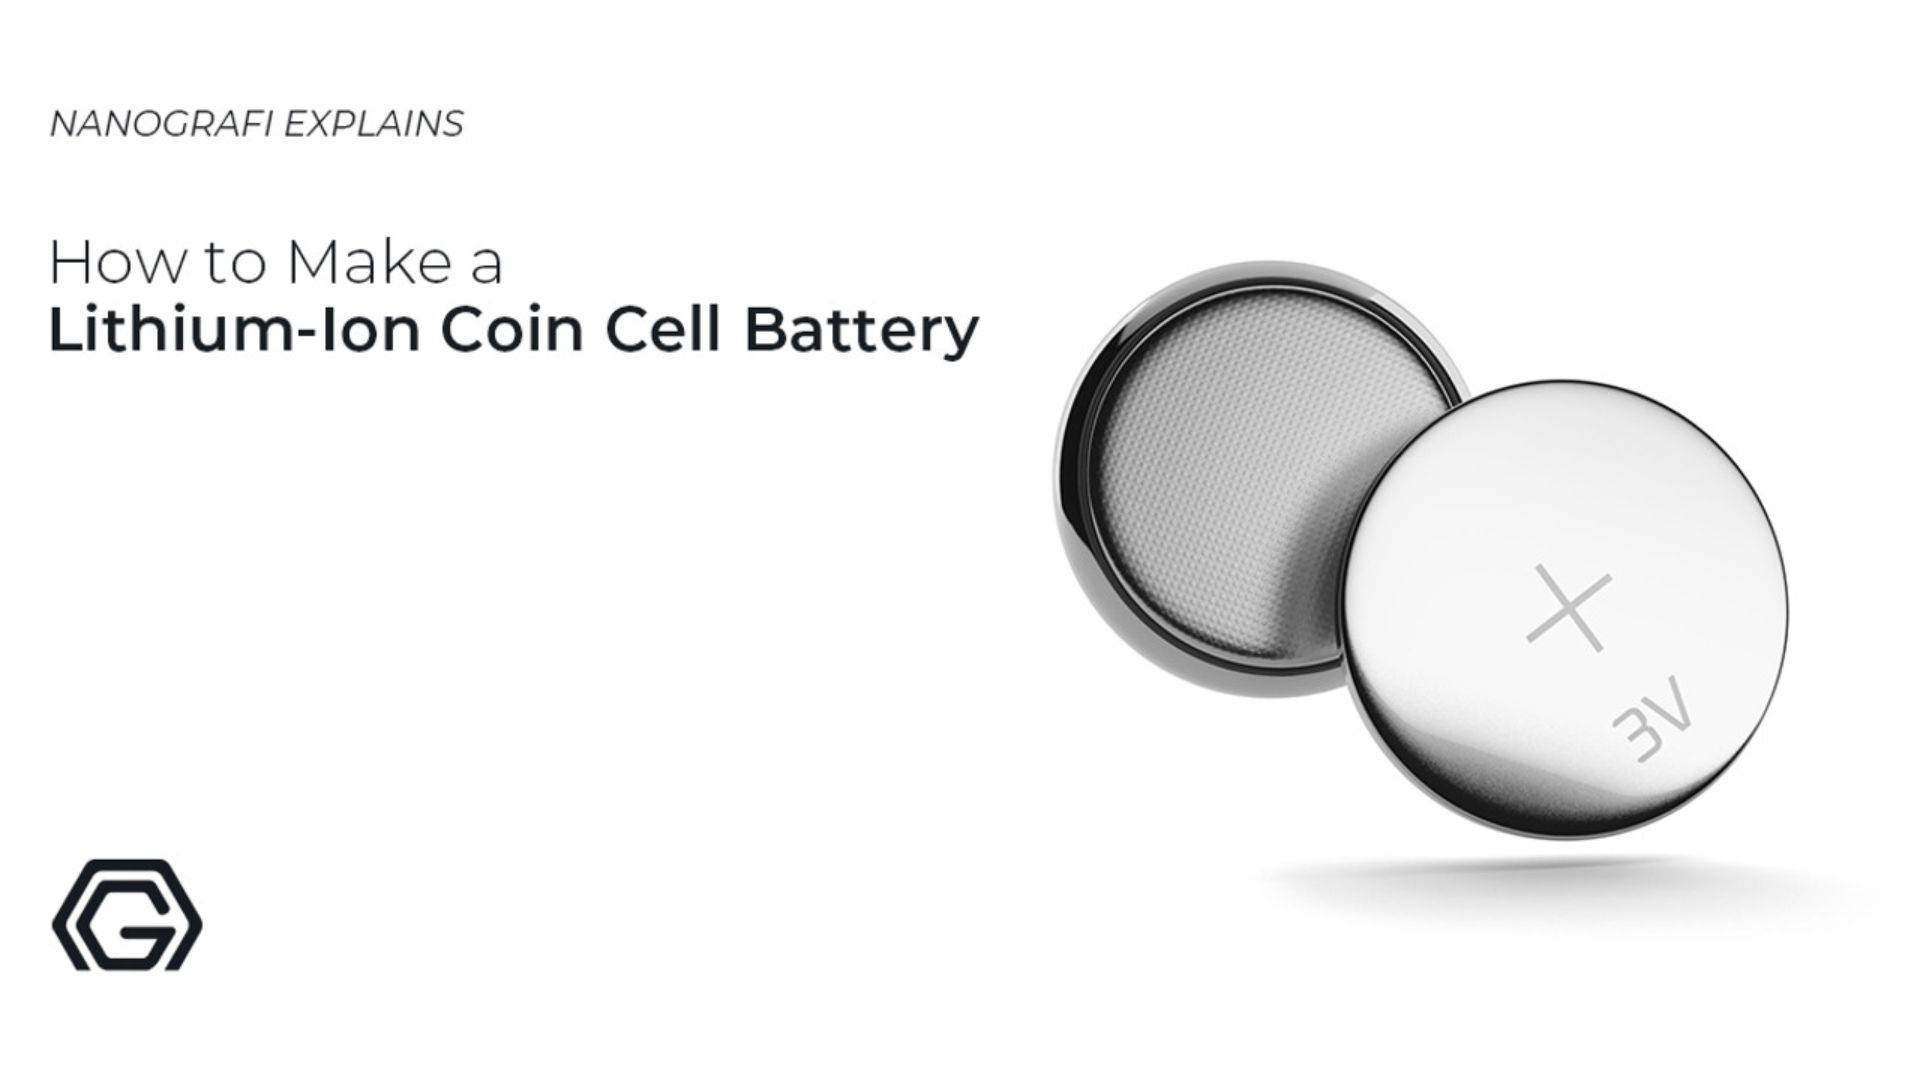 How to make a lithium-ion coin cell battery?